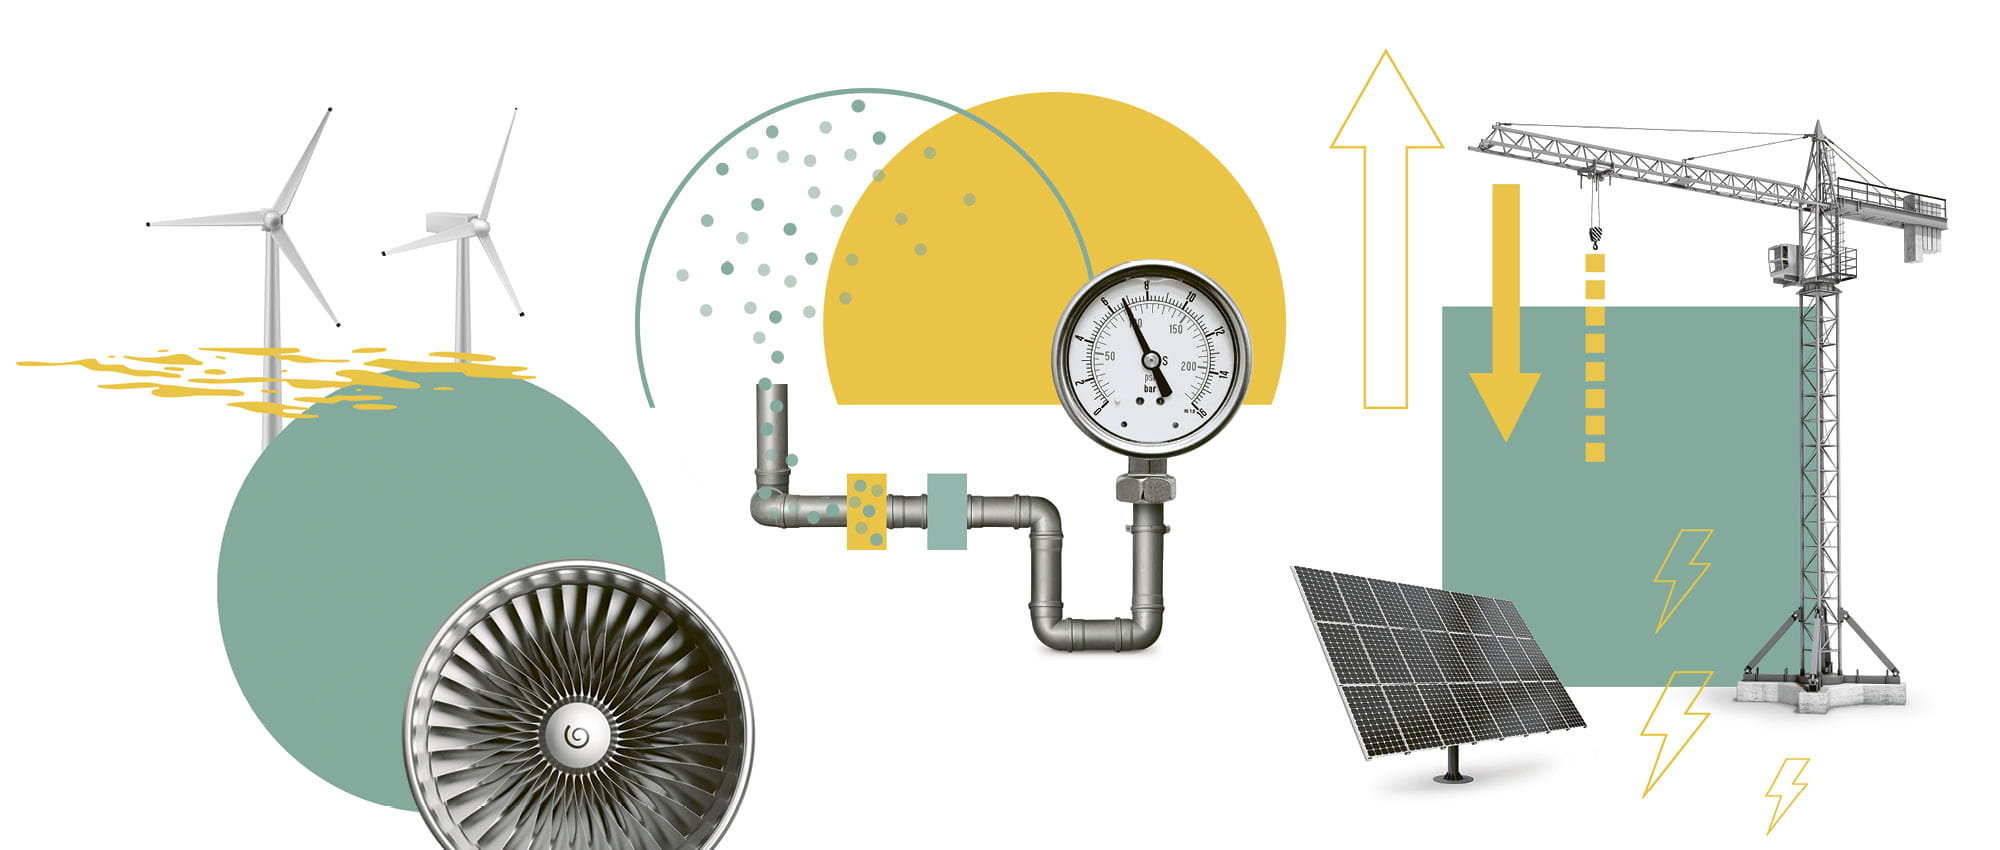 Illustrated collage with a solar plant, a crane, wind wheels and a fan.